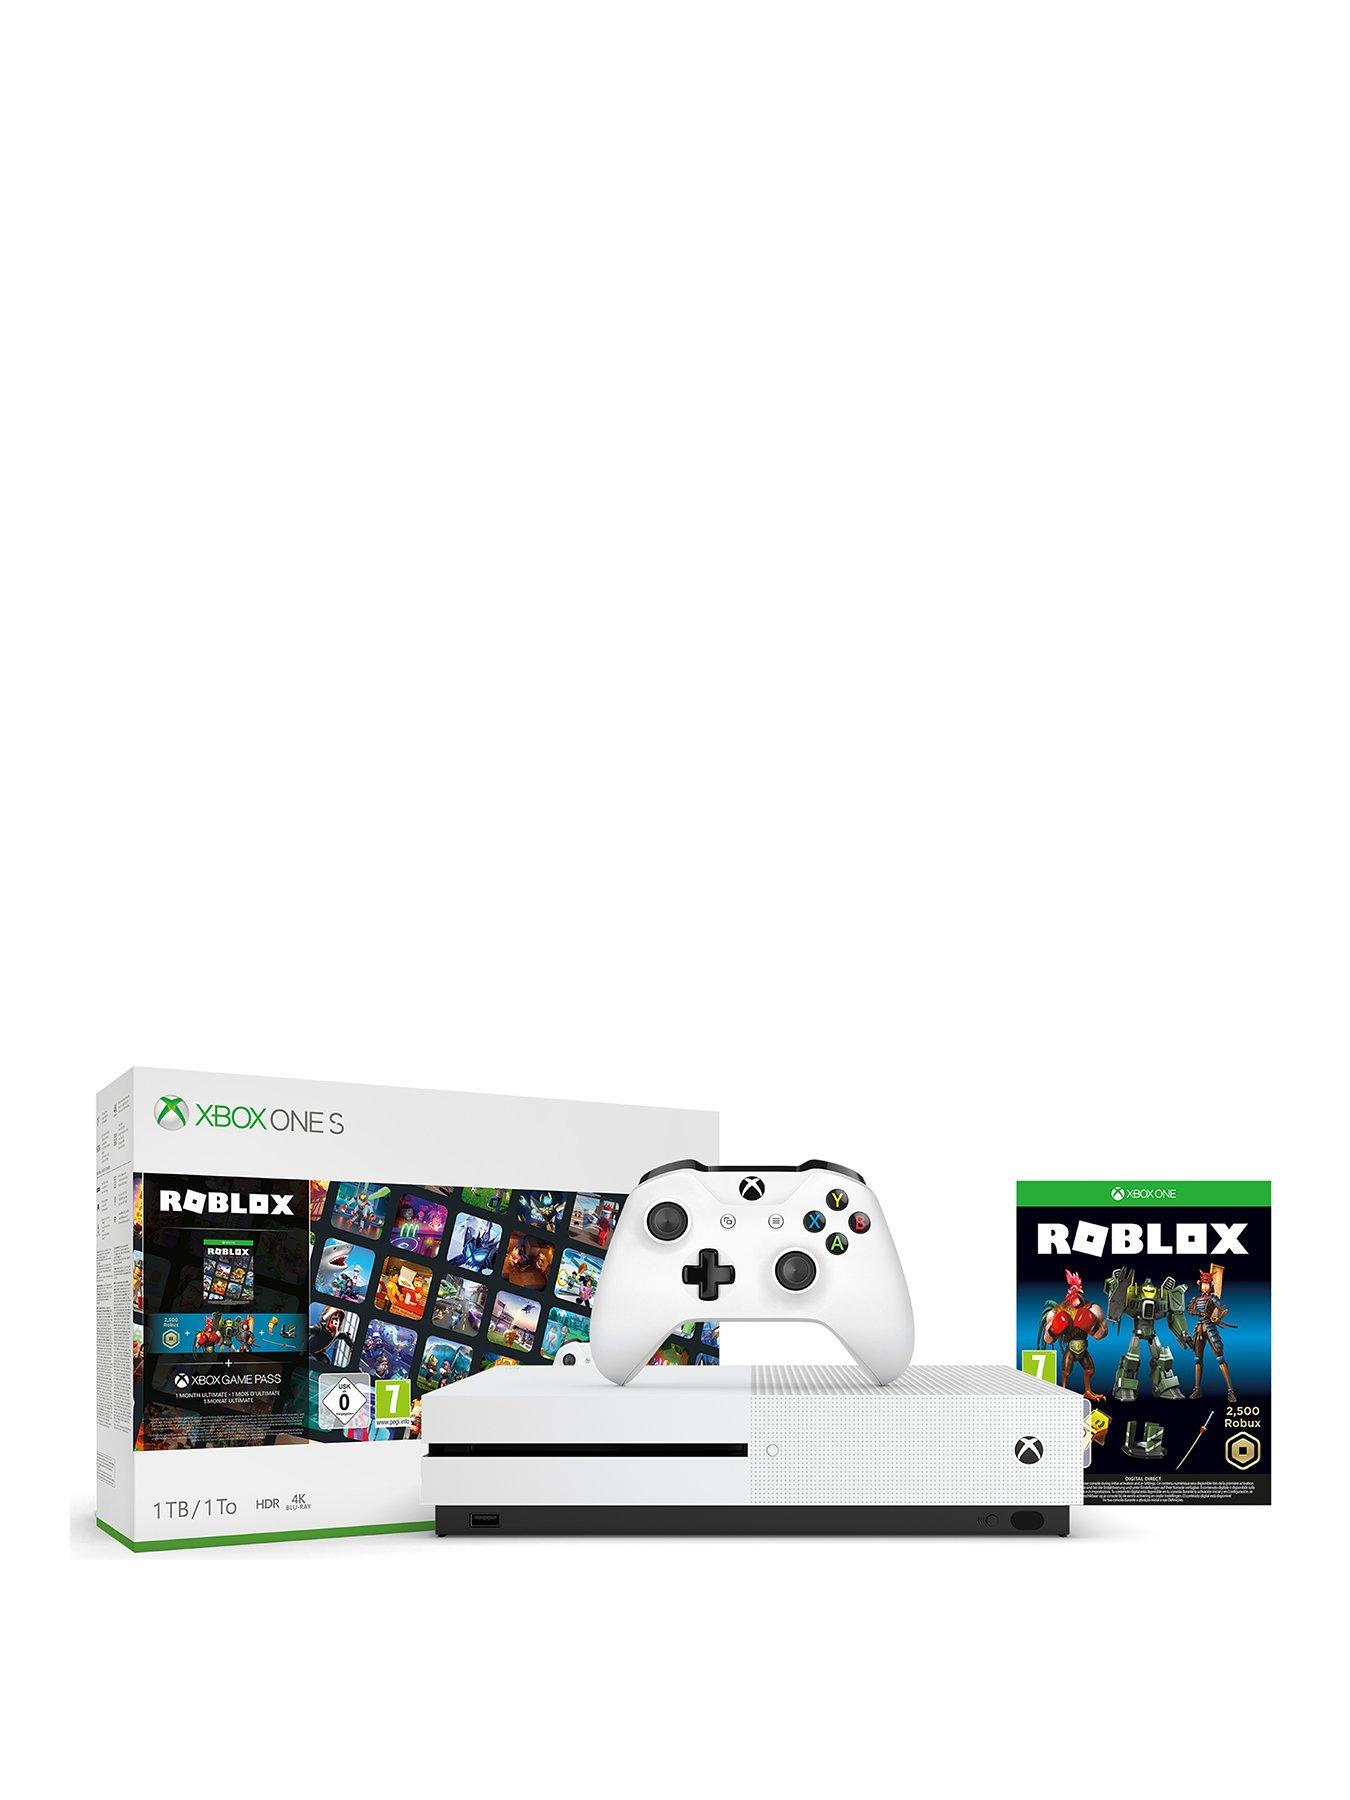 Xbox One S With Roblox Bundle And Optional Extras 1tb Console White Very Co Uk - ick foot roblox